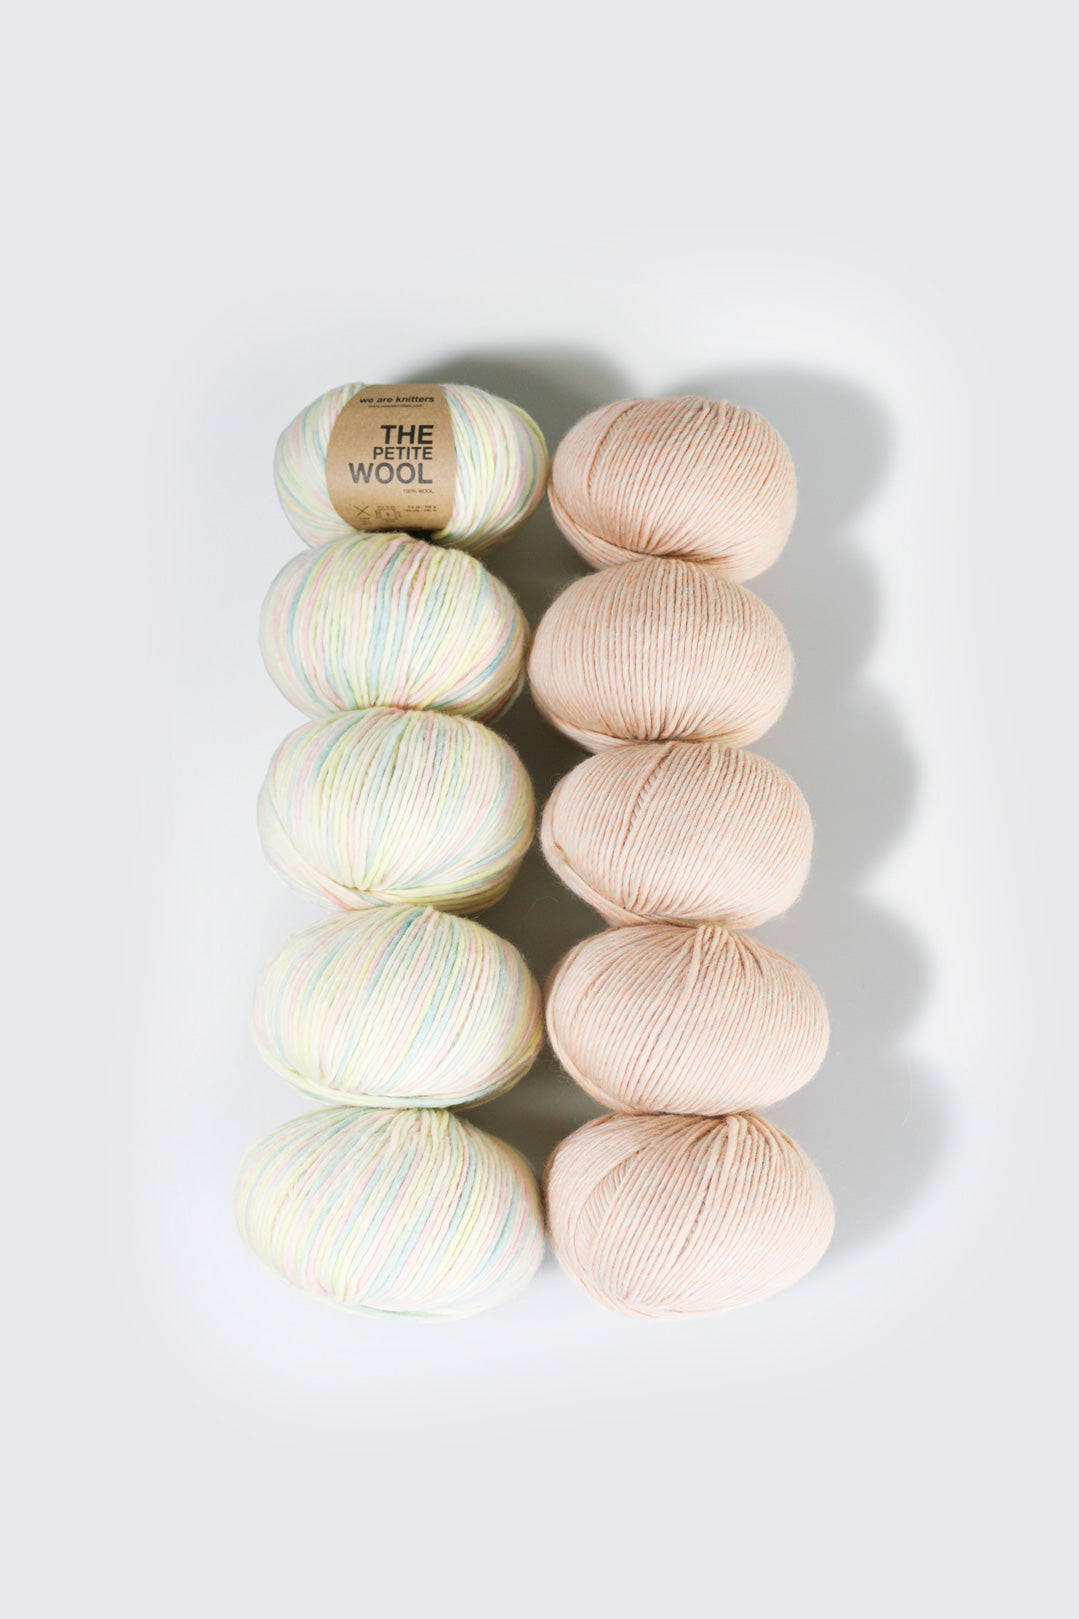 We Are Knitters: craft your joy with yarn and easy and advanced patter –  weareknitters